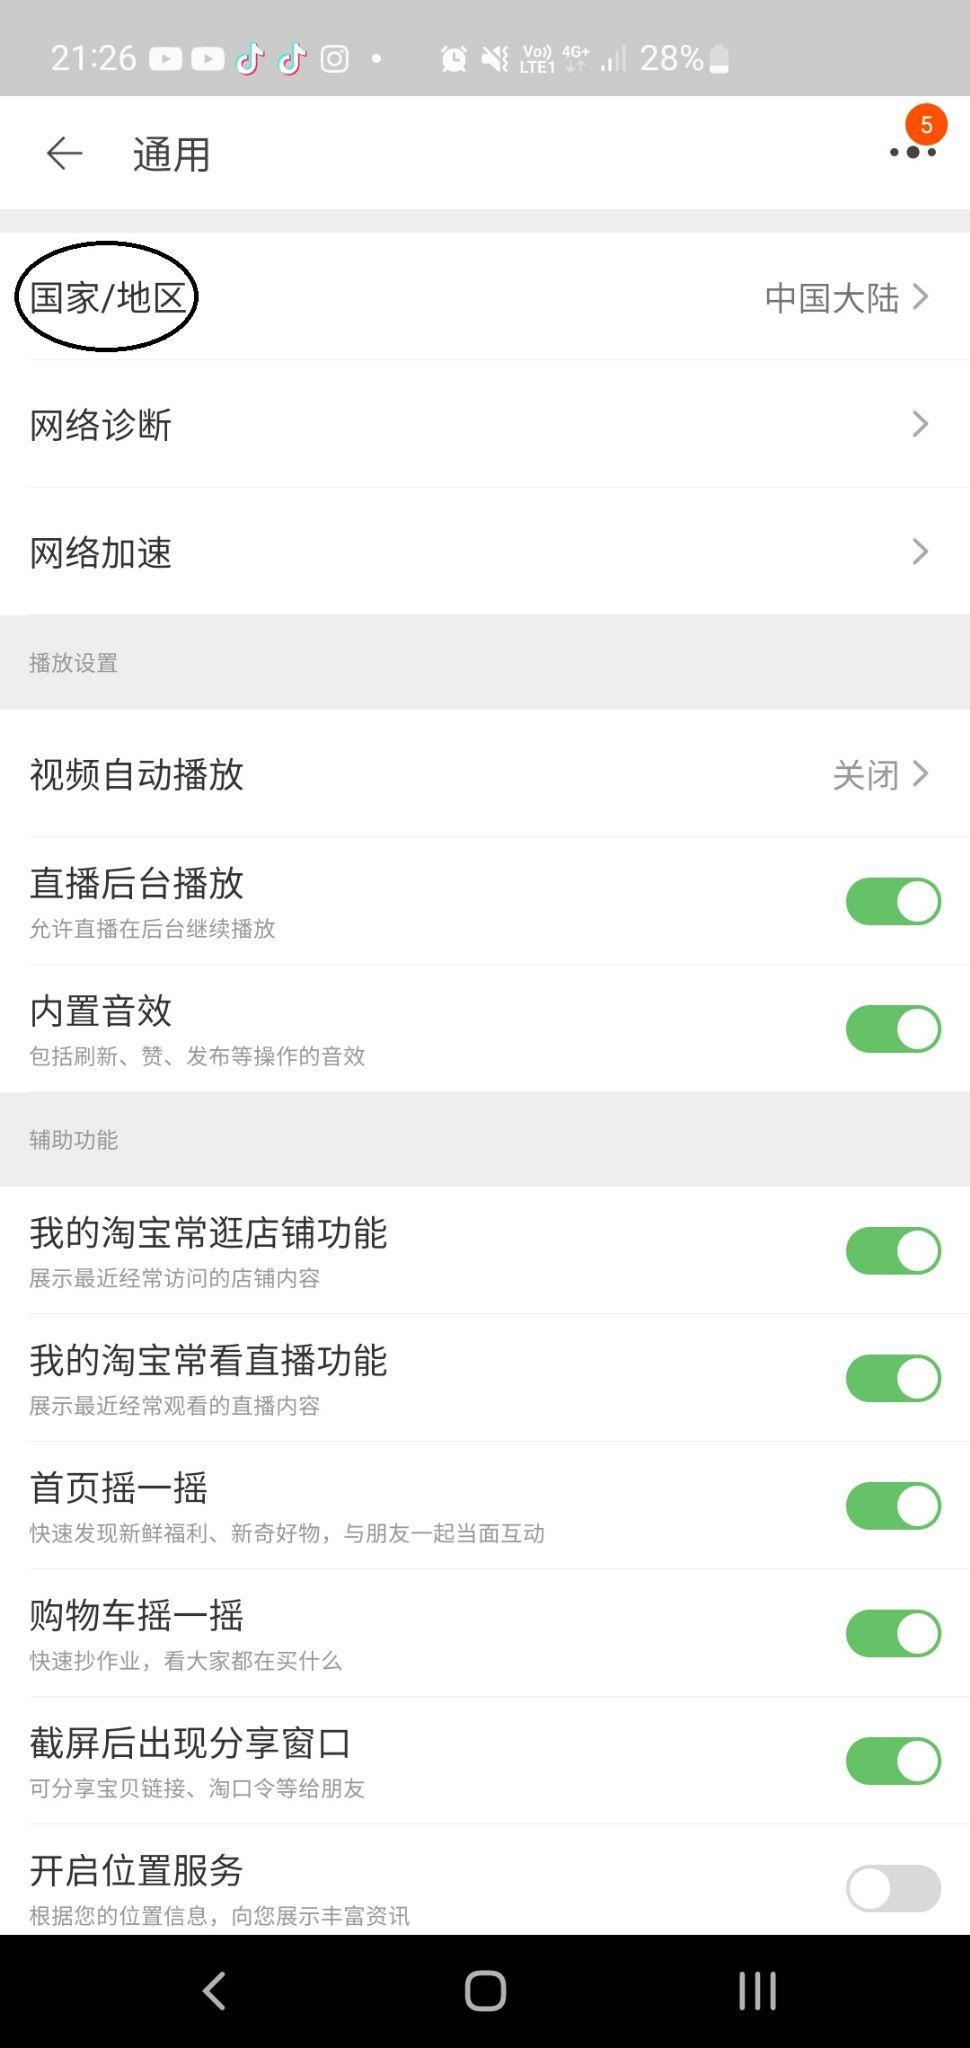 Contact Taobao customer support on mobile